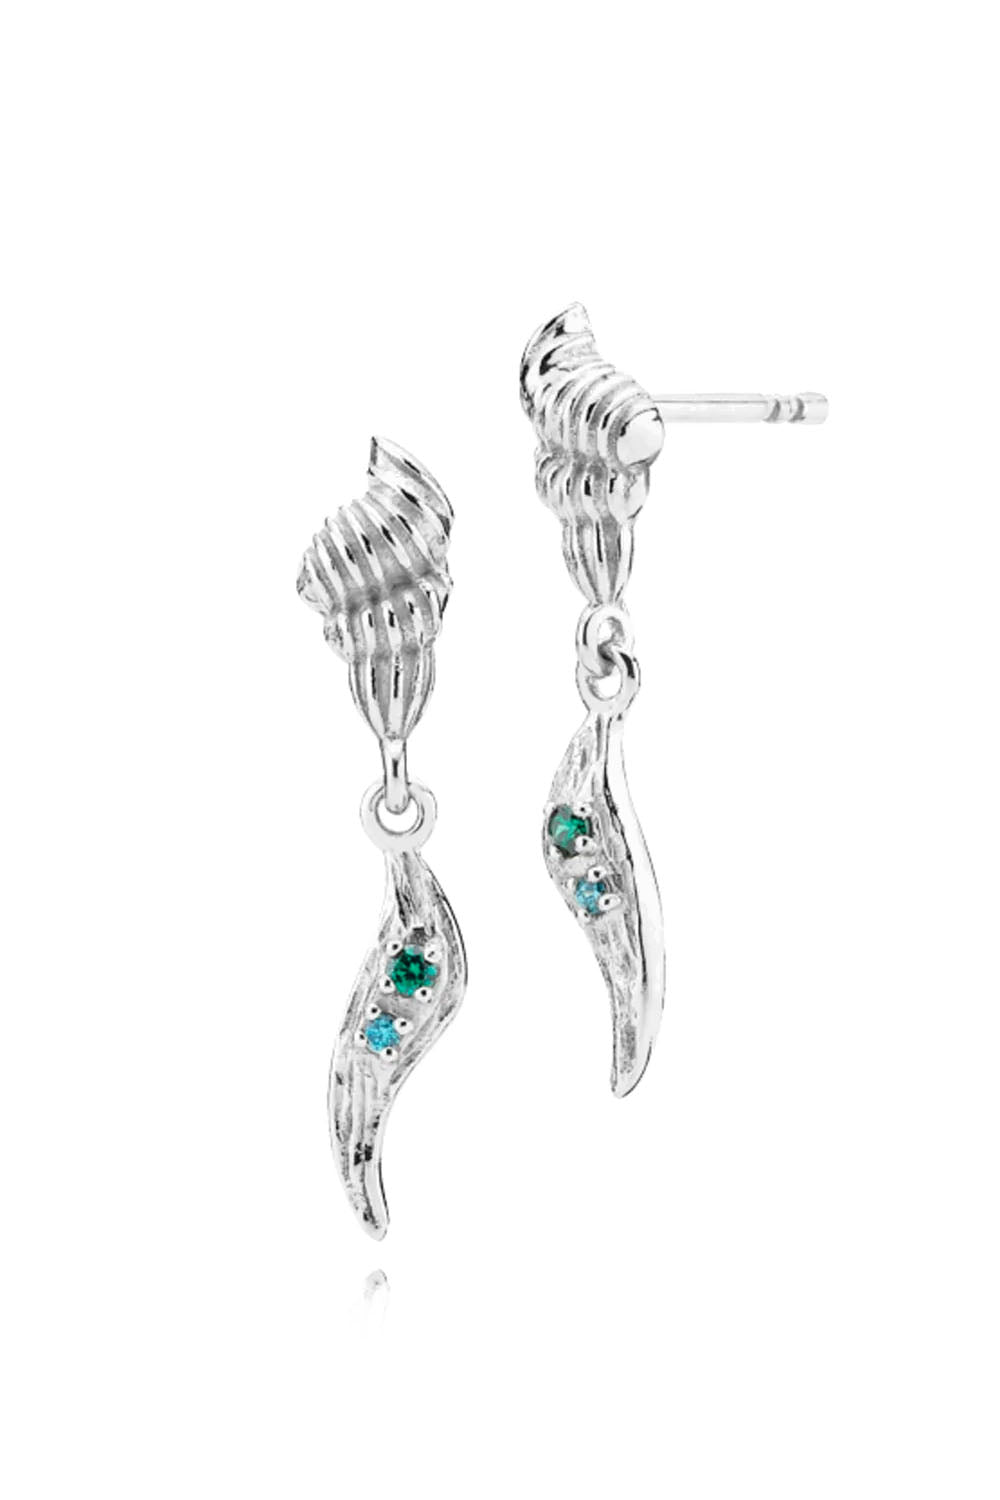 Kaia-Earrings-Silver-with-green-onyx-and-blue-topaz